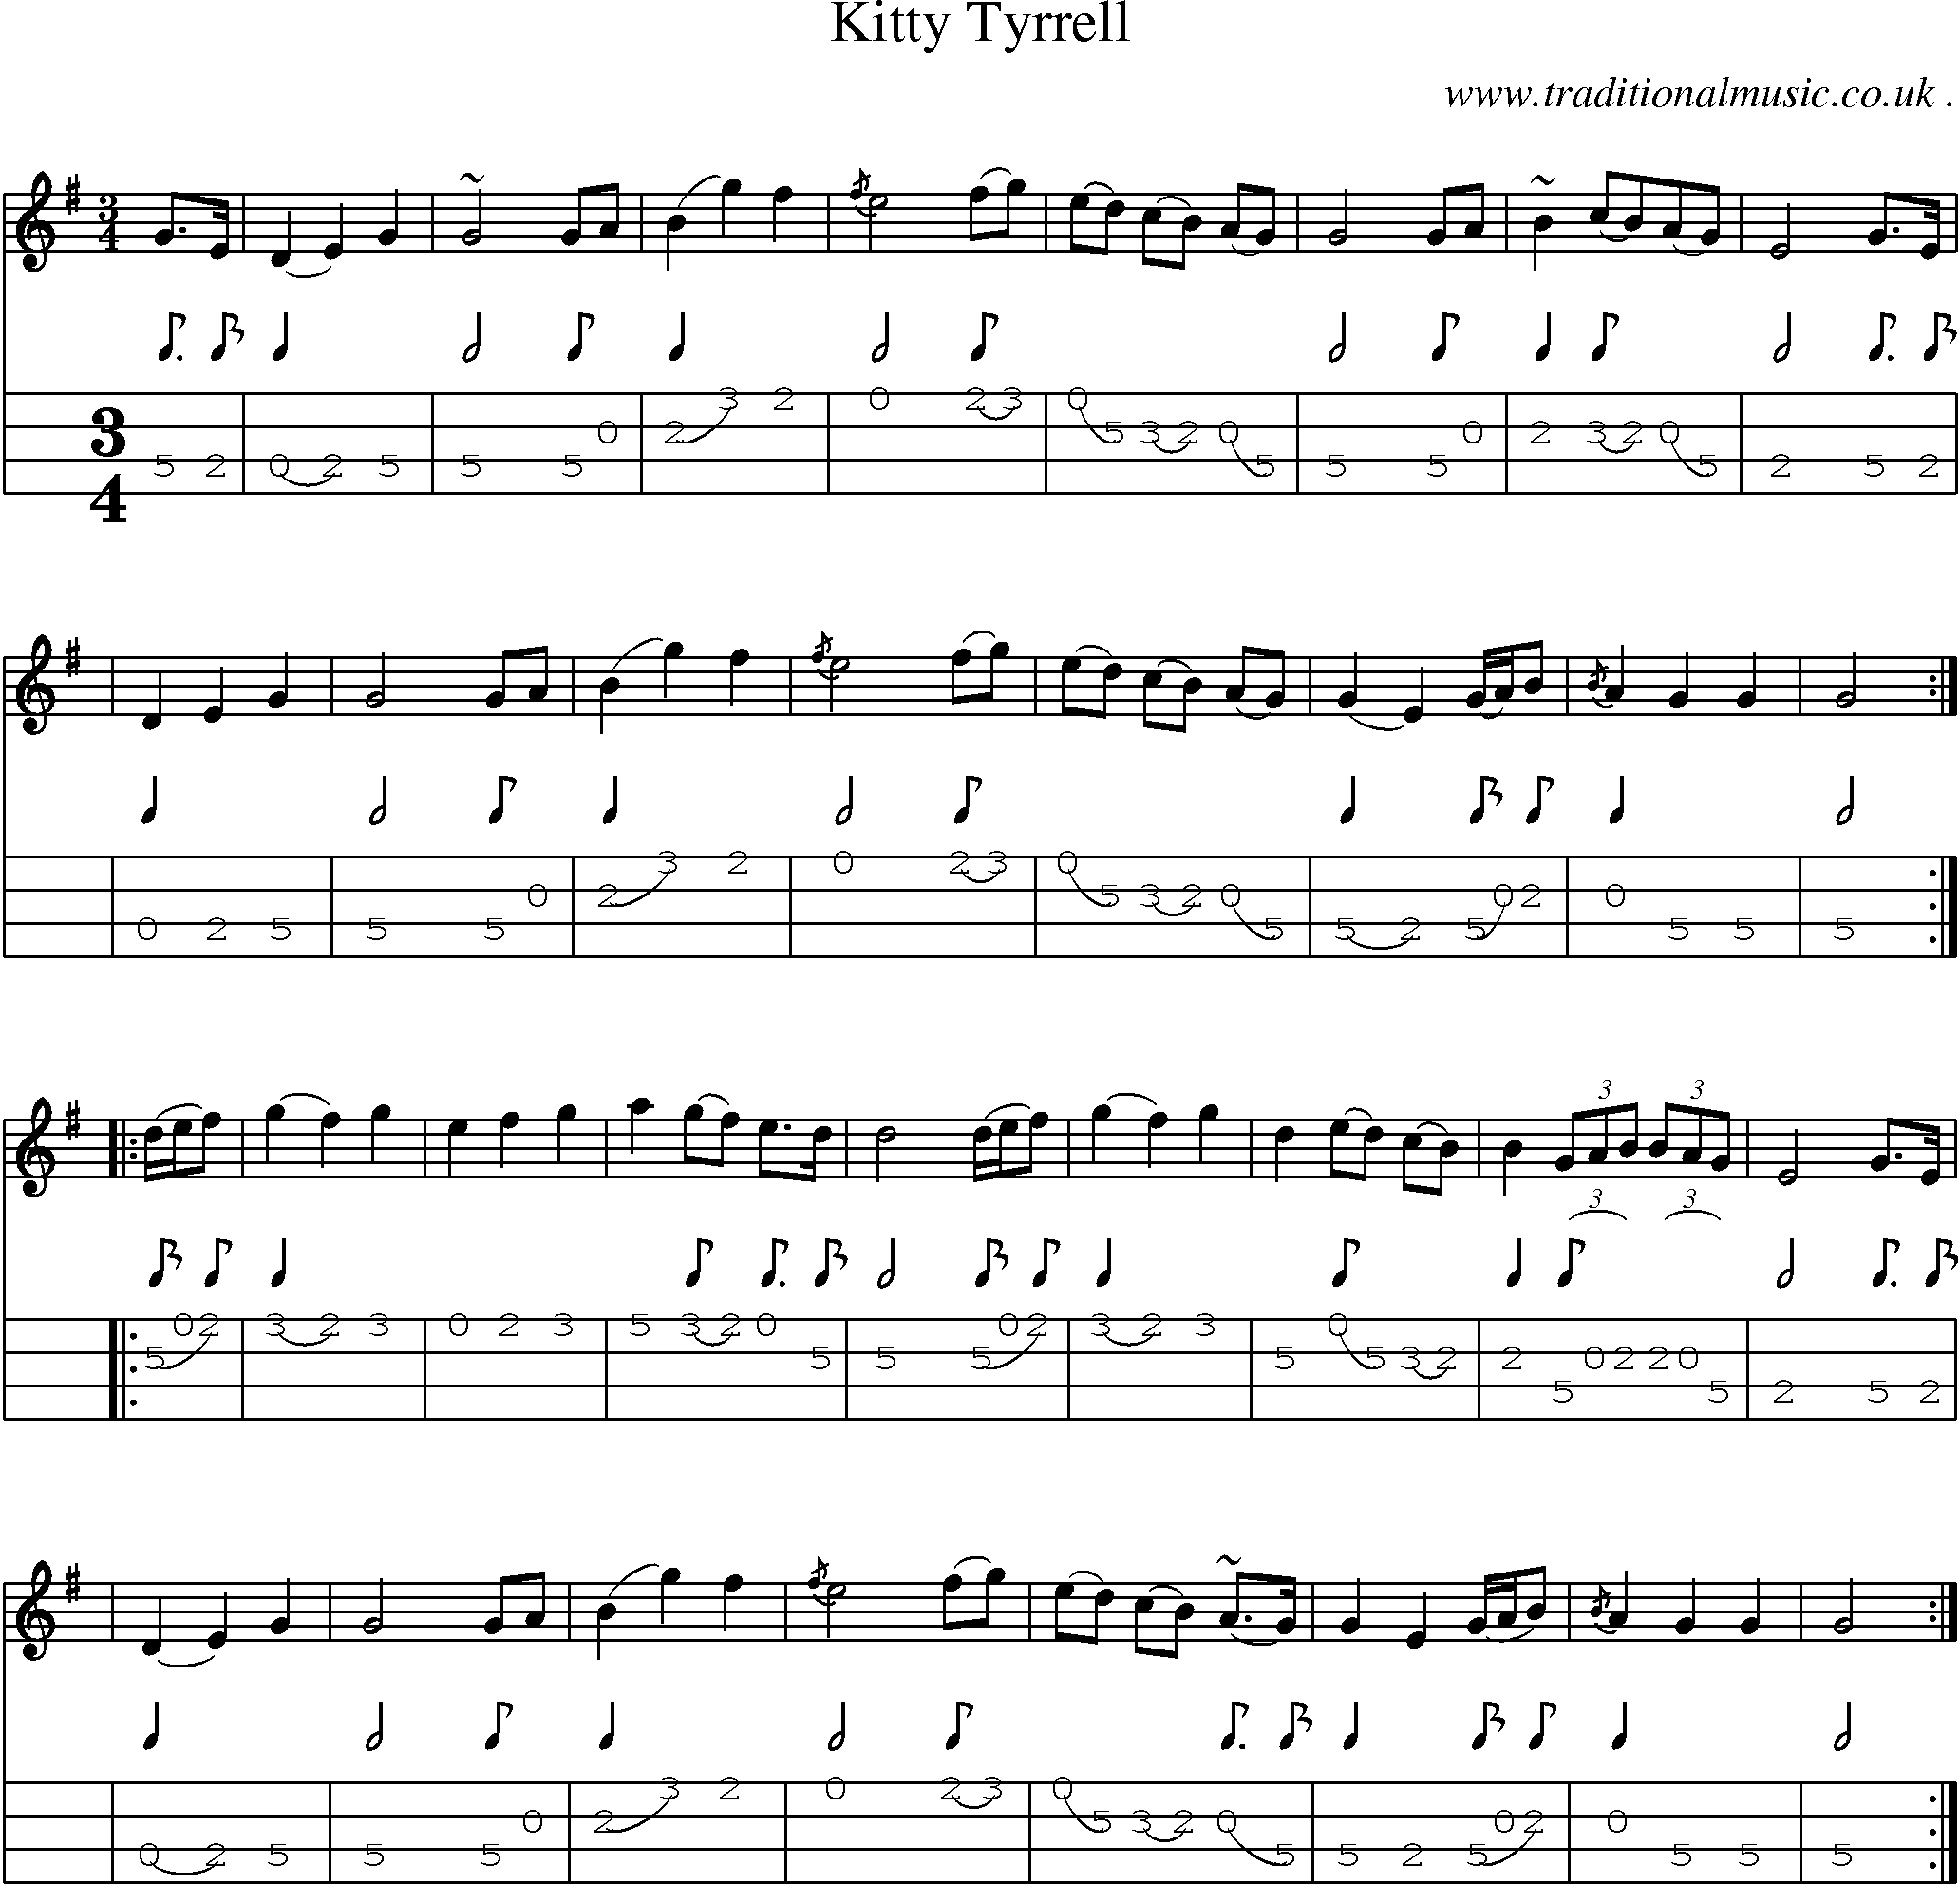 Sheet-music  score, Chords and Mandolin Tabs for Kitty Tyrrell